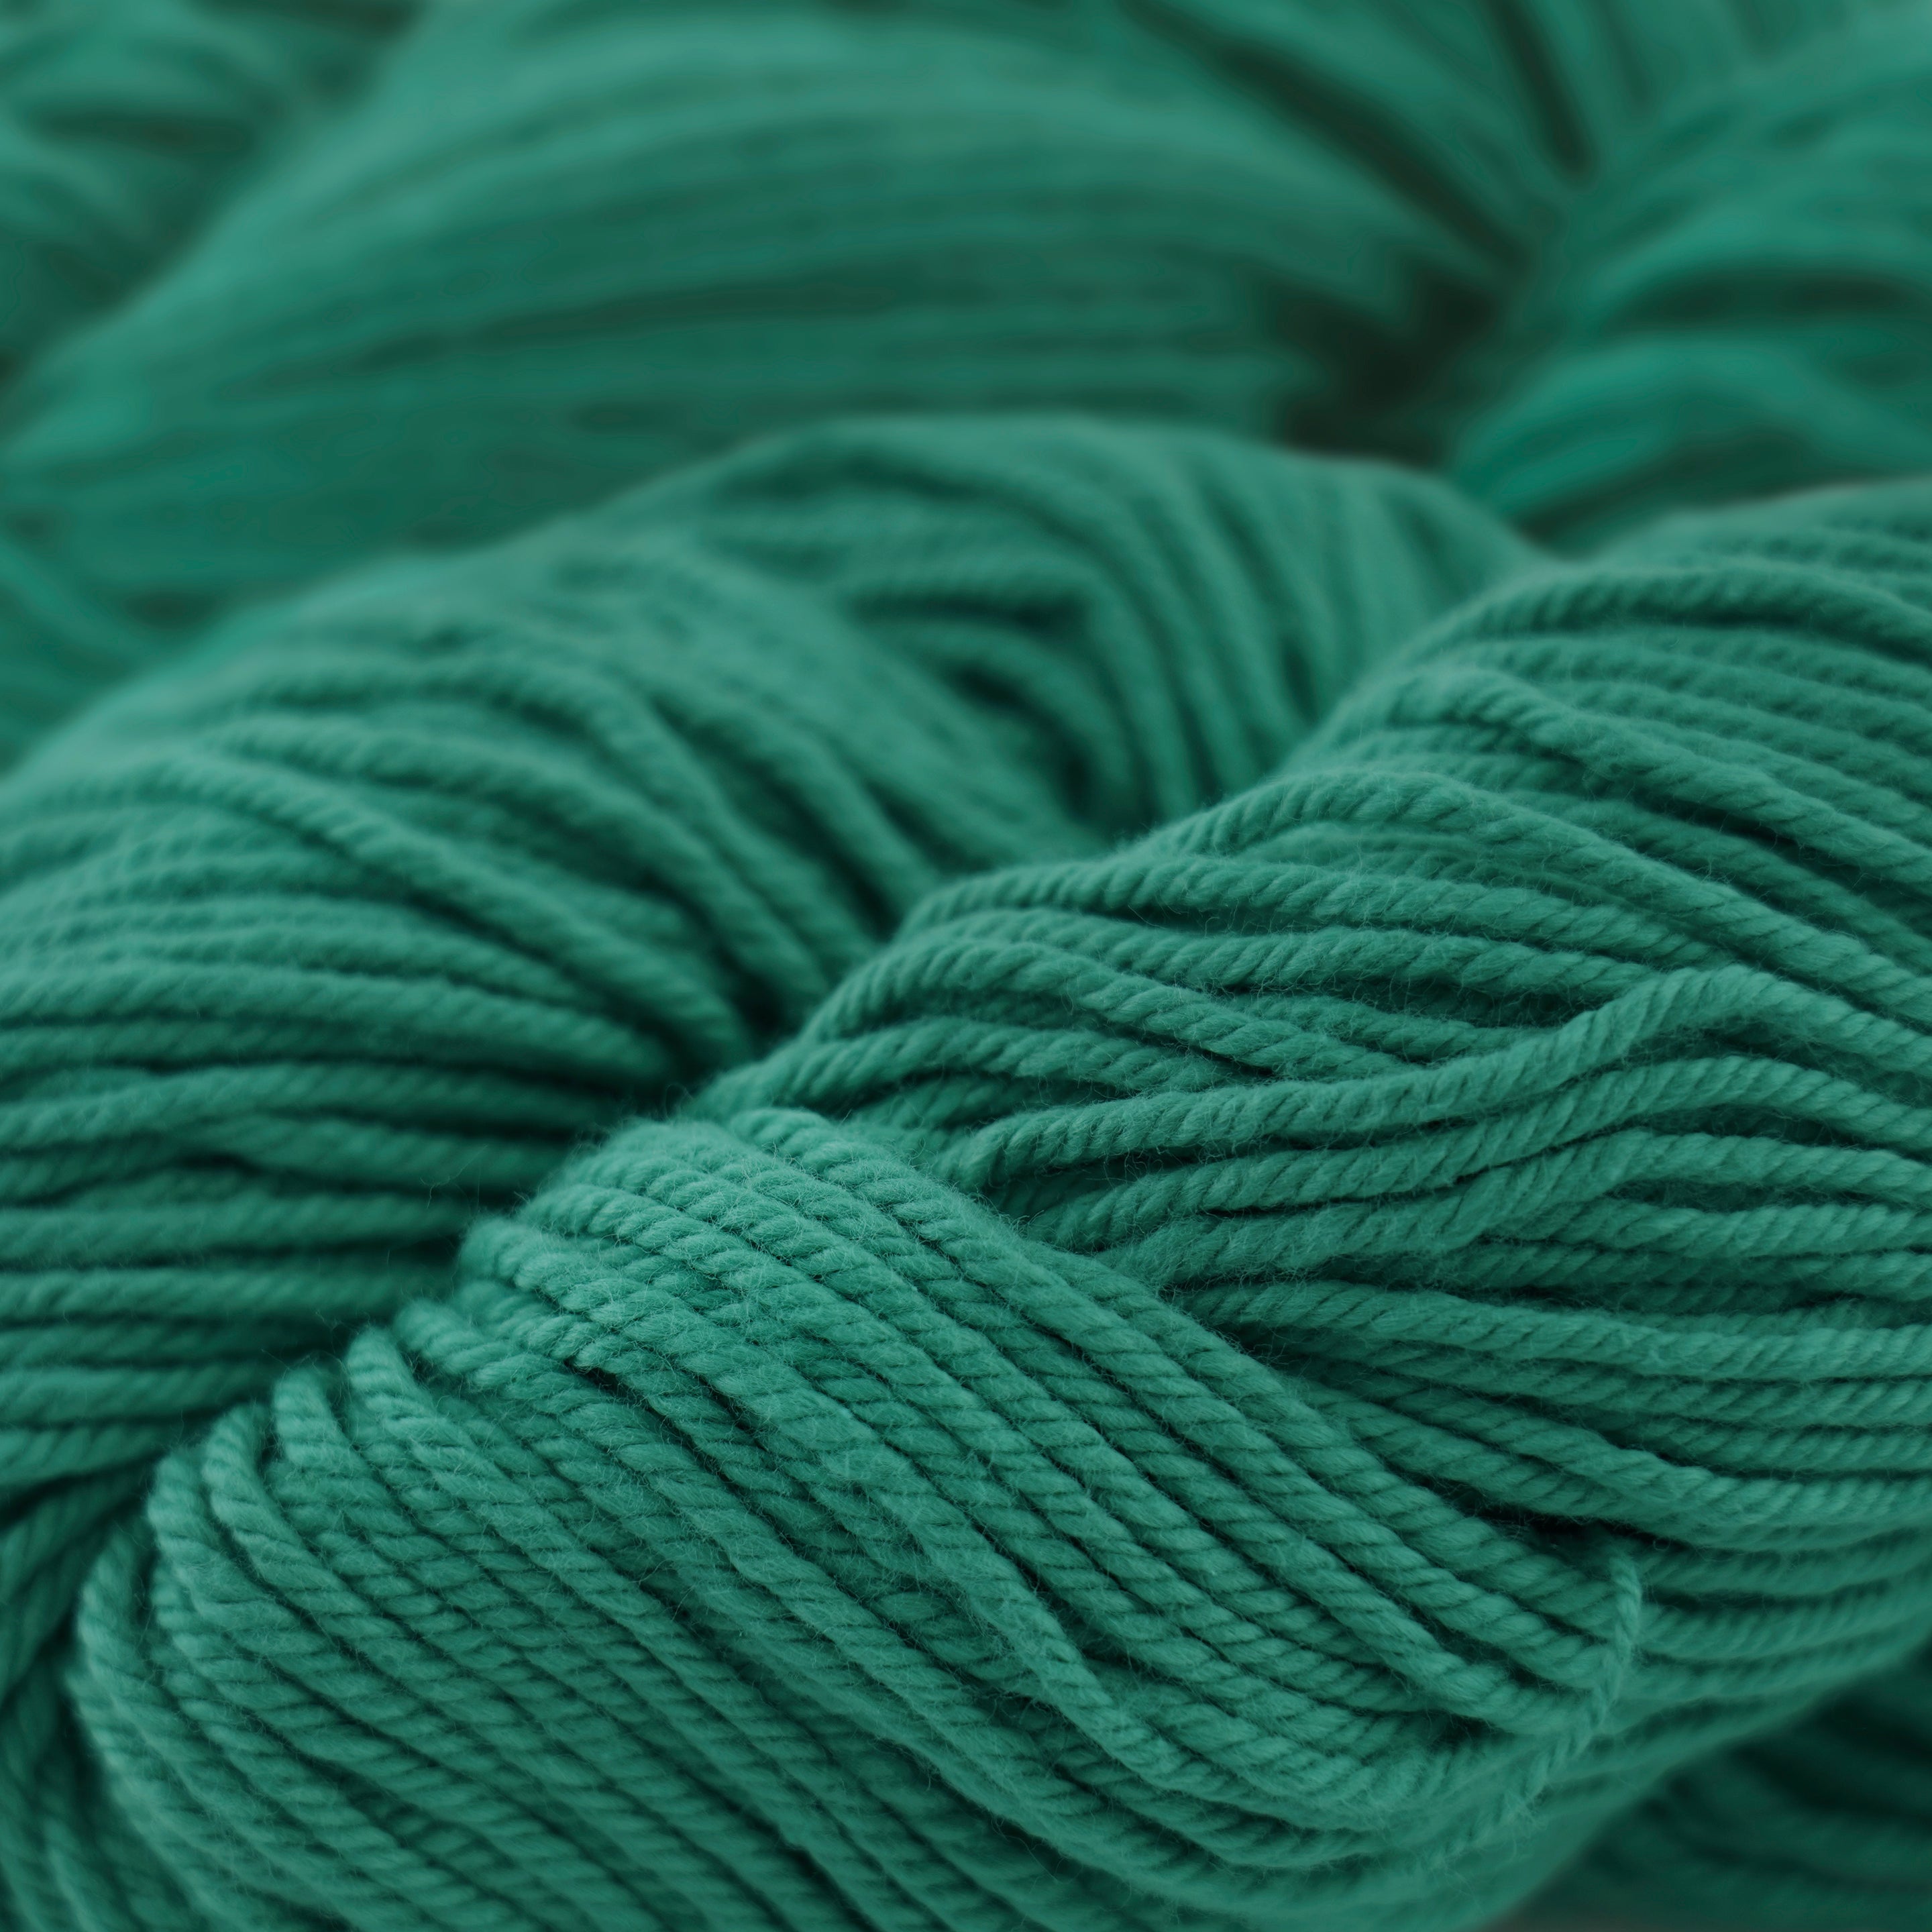 Skein of Cascade Nifty Cotton Worsted weight yarn in the color Sea Green (Green) for knitting and crocheting.